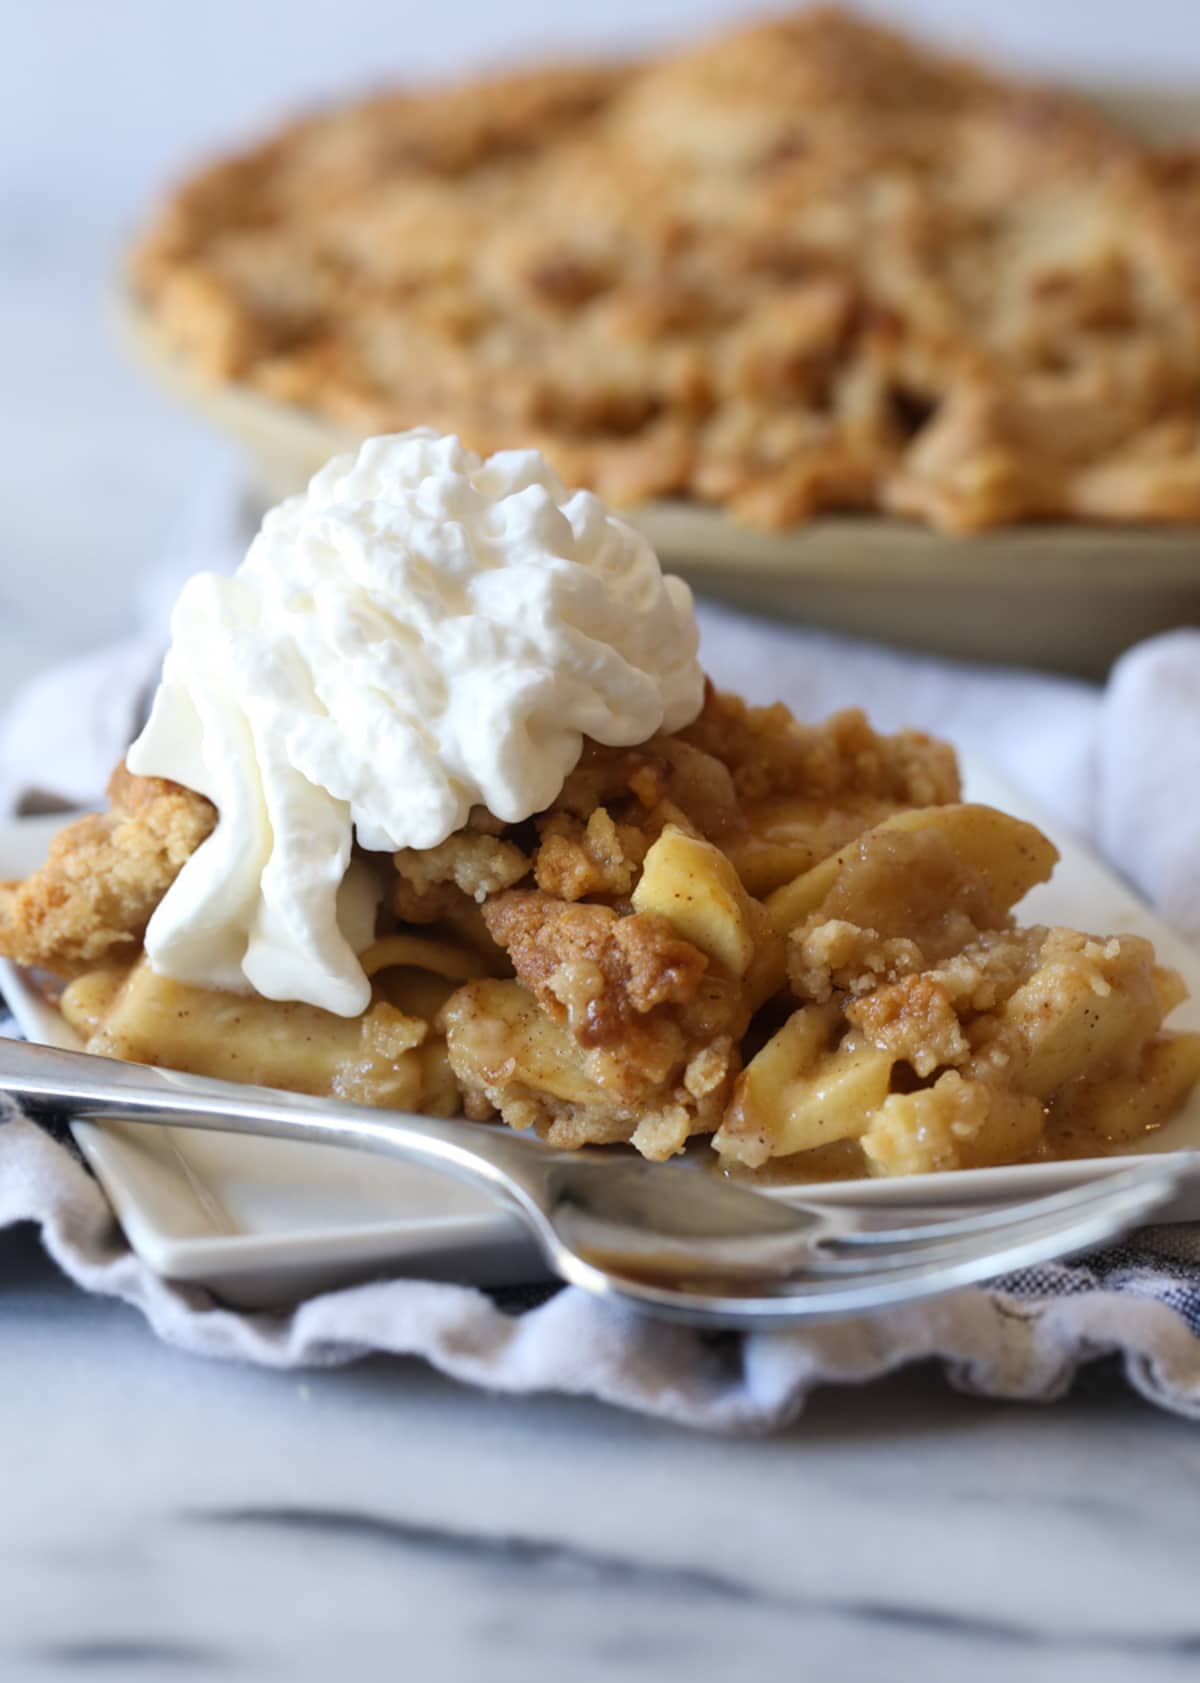 A slice of Dutch apple pie topped with whipped cream